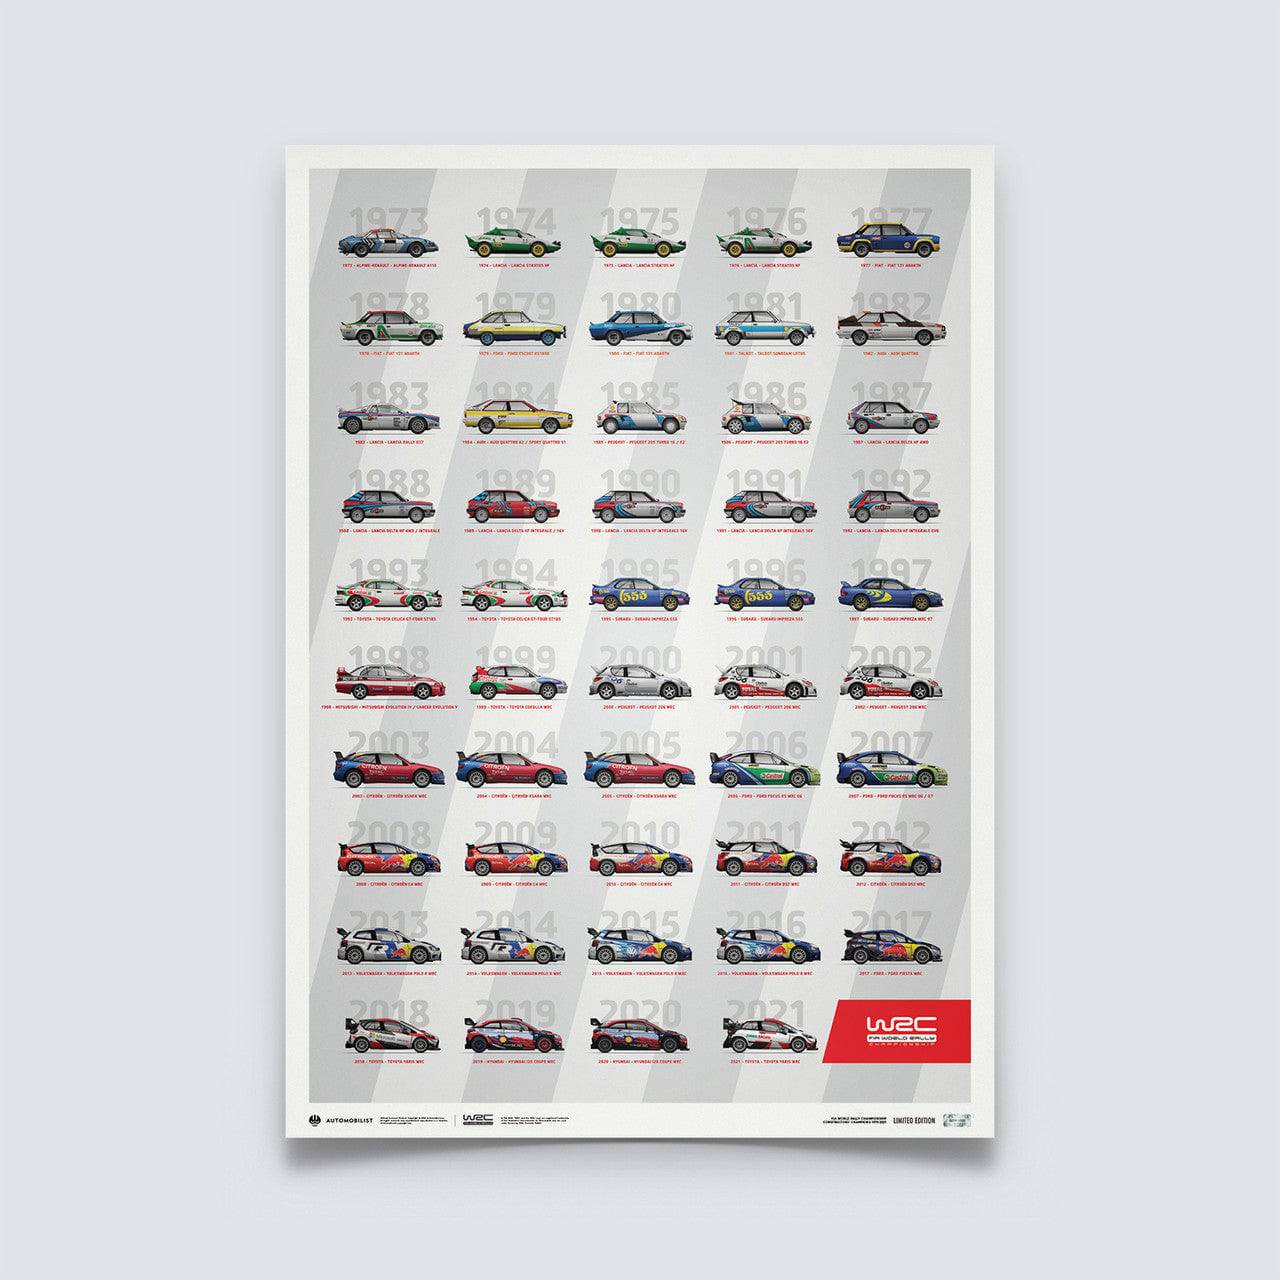 WRC Manufacturers’ Champions 1973-2021 - 49th Anniversary | Limited Edition